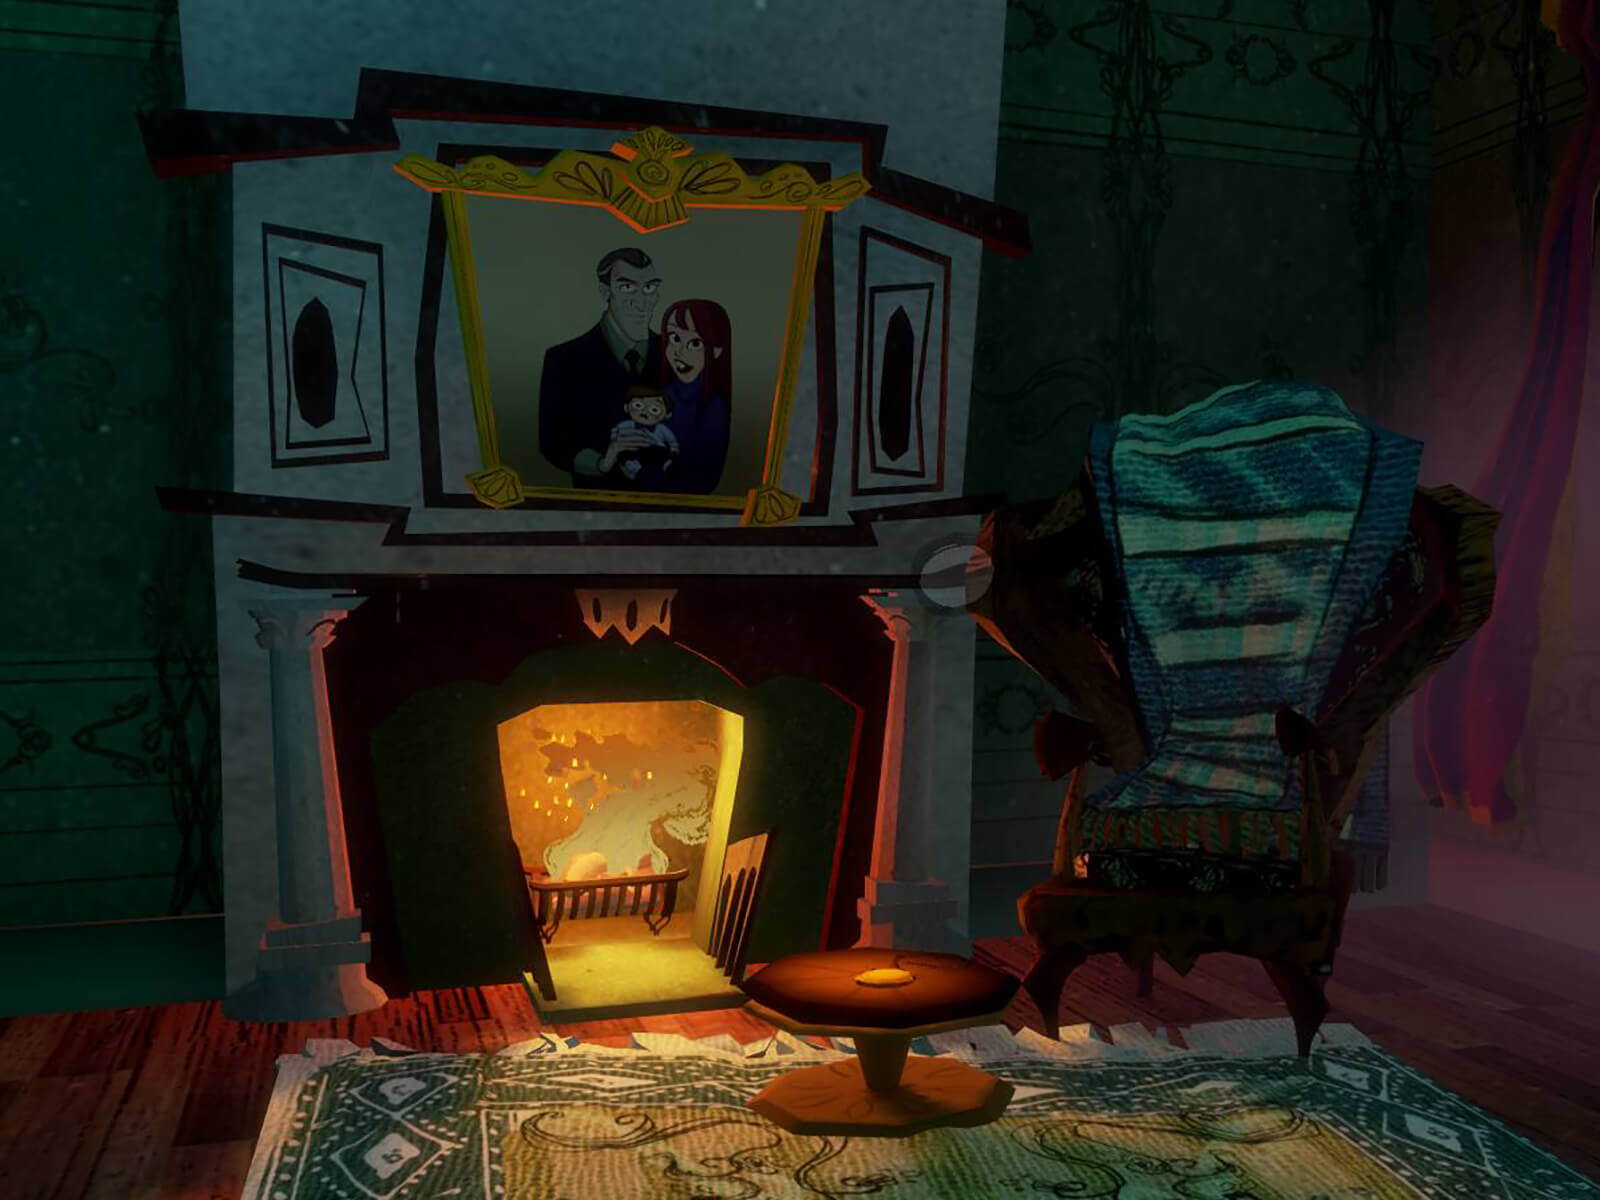 Screenshot from Penny Blue Finds a Clue featuring a darkened room with a family portrait above a fireplace and a wing chair beside it